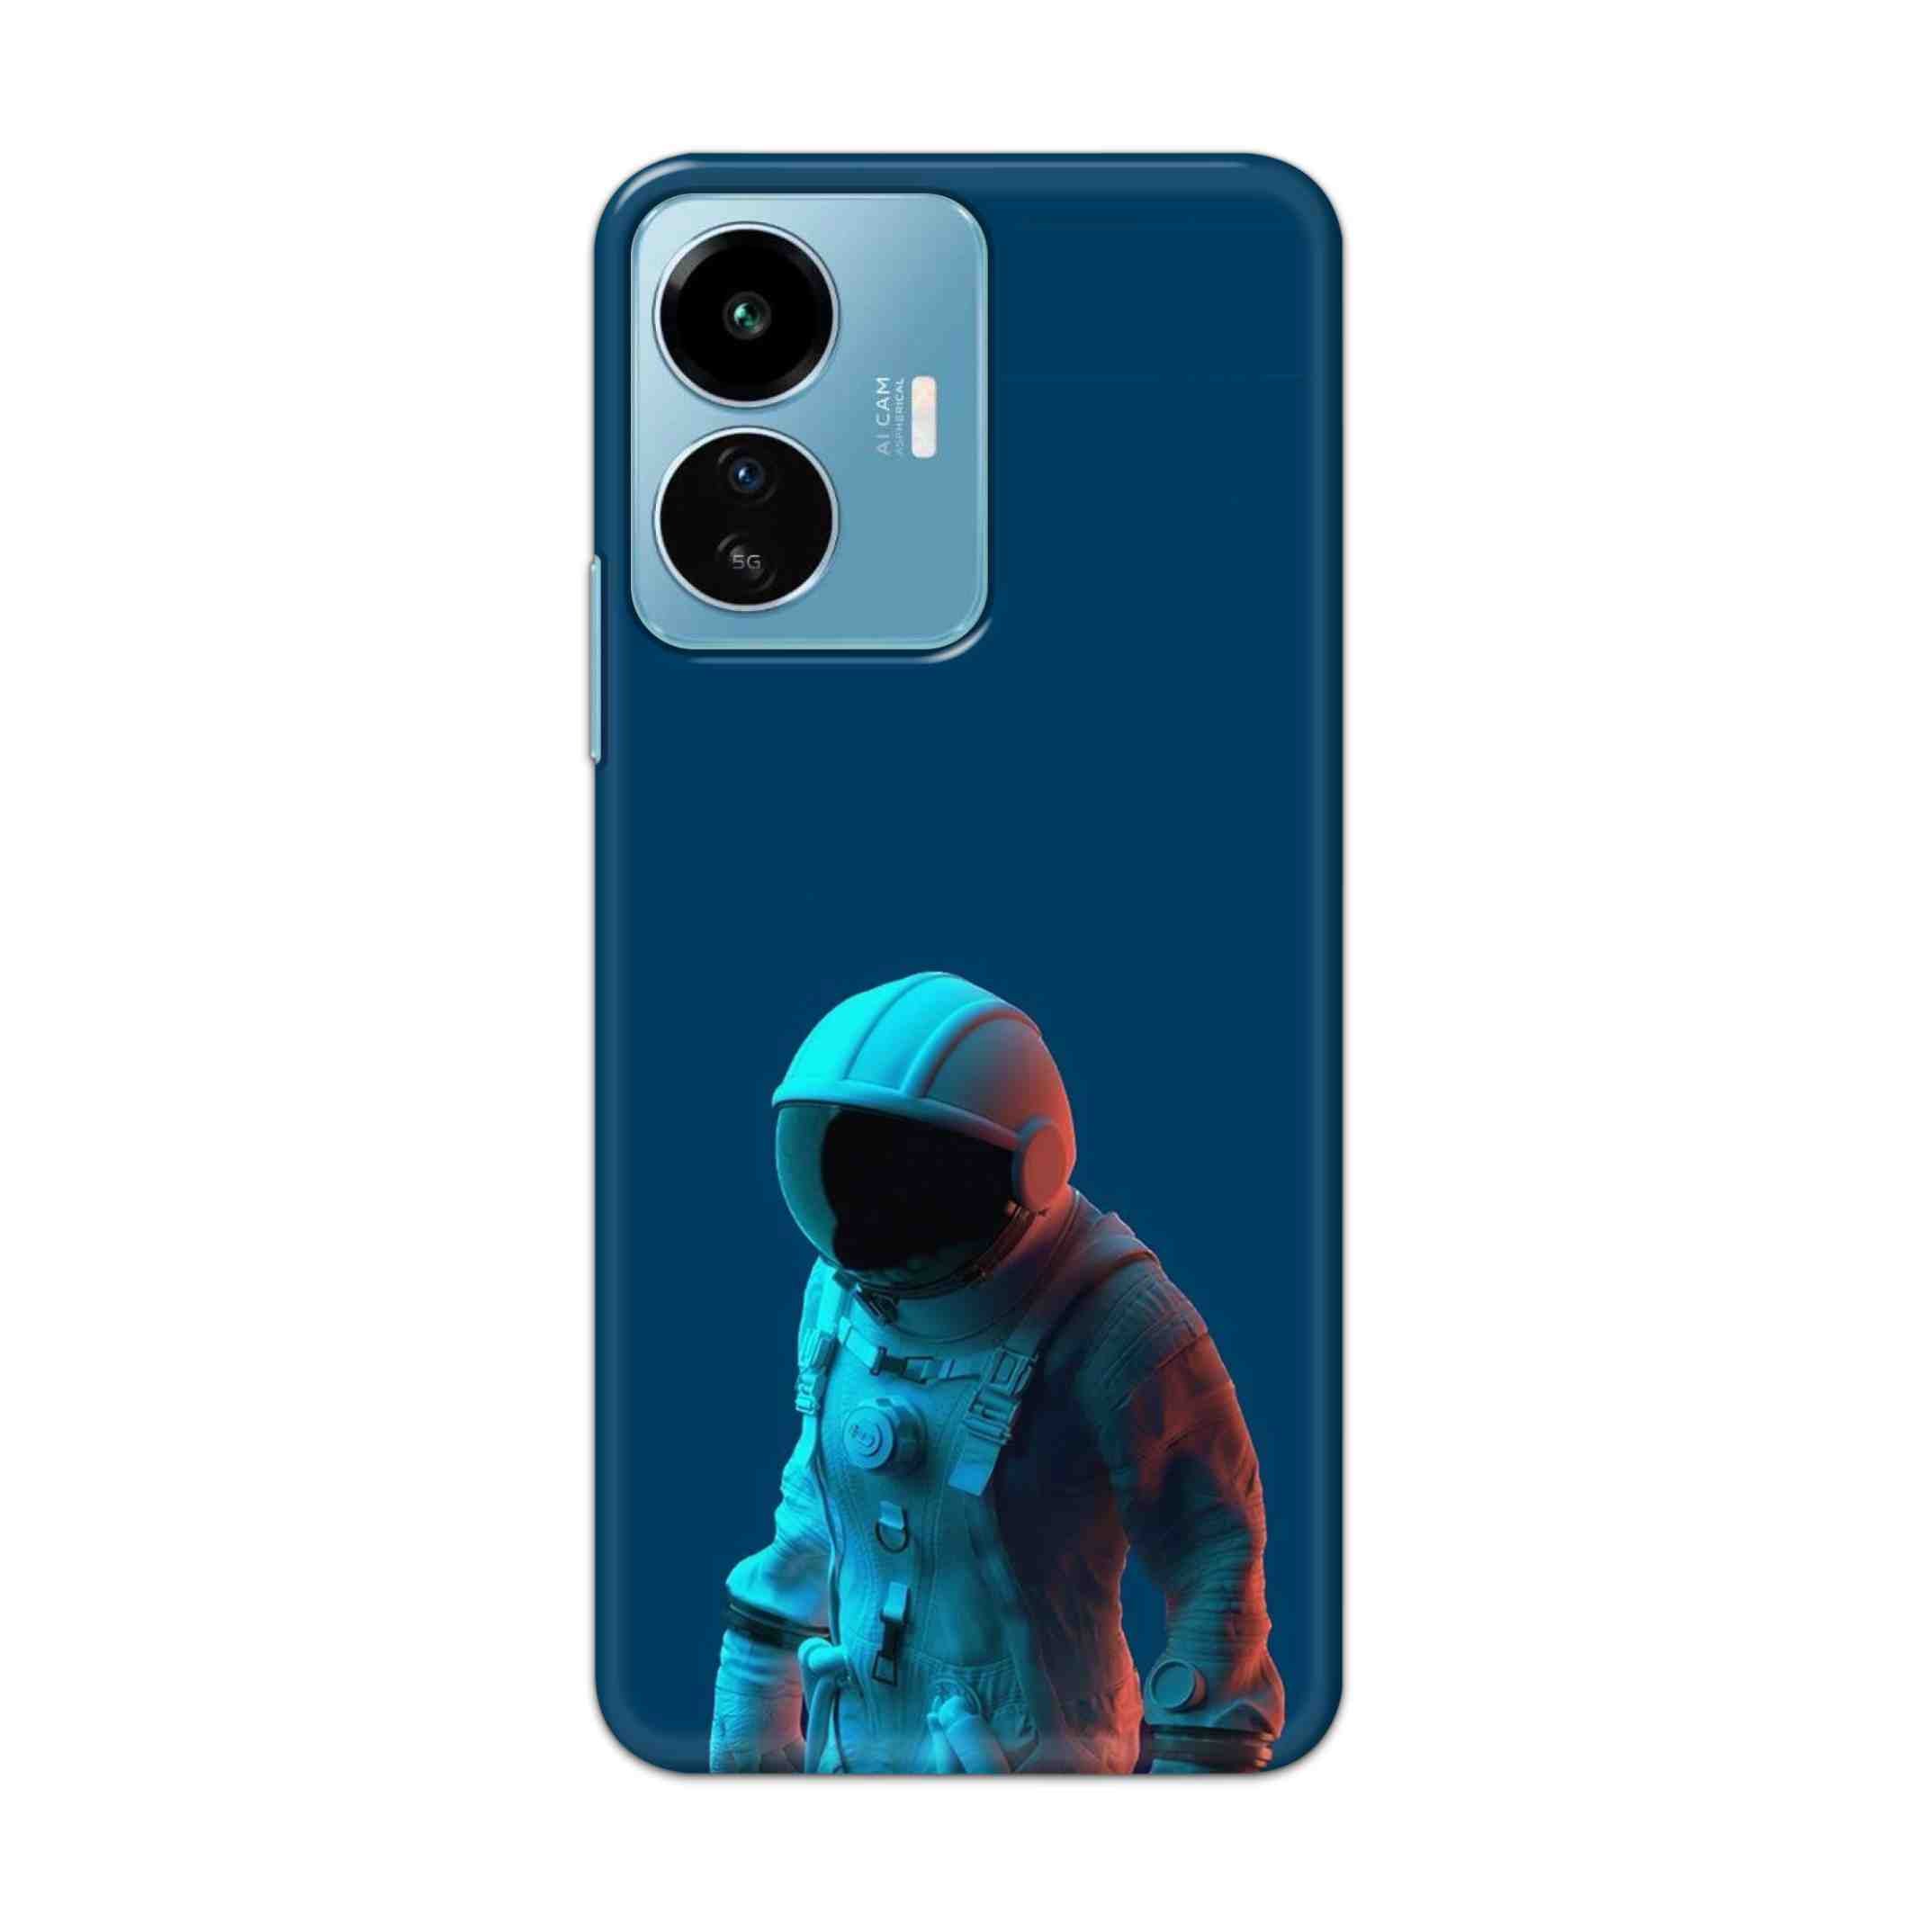 Buy Blue Astronaut Hard Back Mobile Phone Case Cover For IQOO Z6 Lite 5G Online